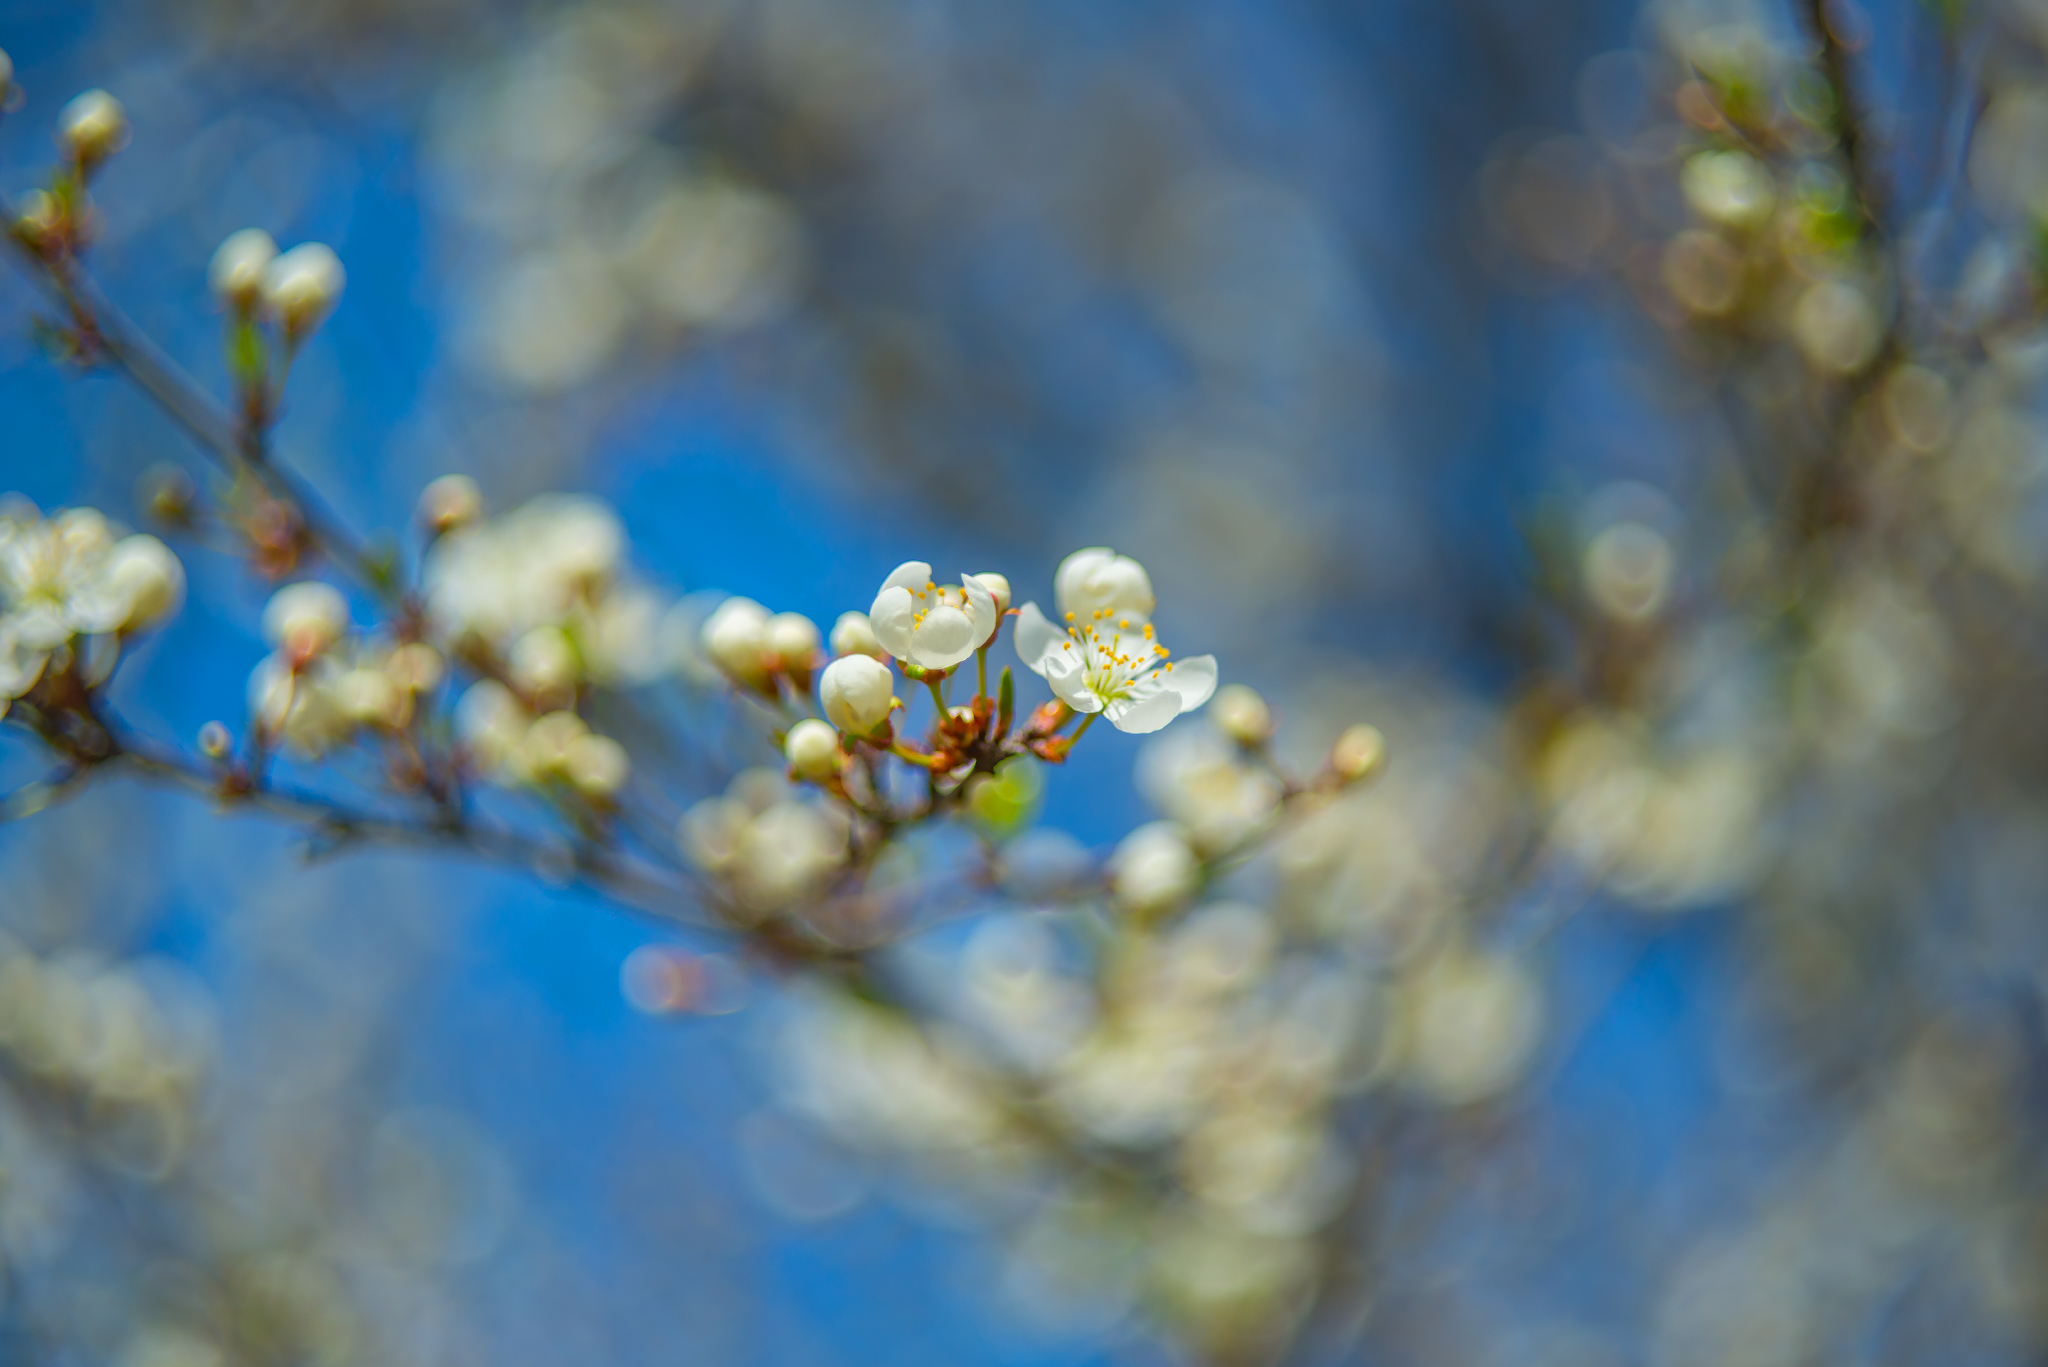 The trees have blossomed - My, Spring, Fruit trees, Helios-44, Longpost, Bloom